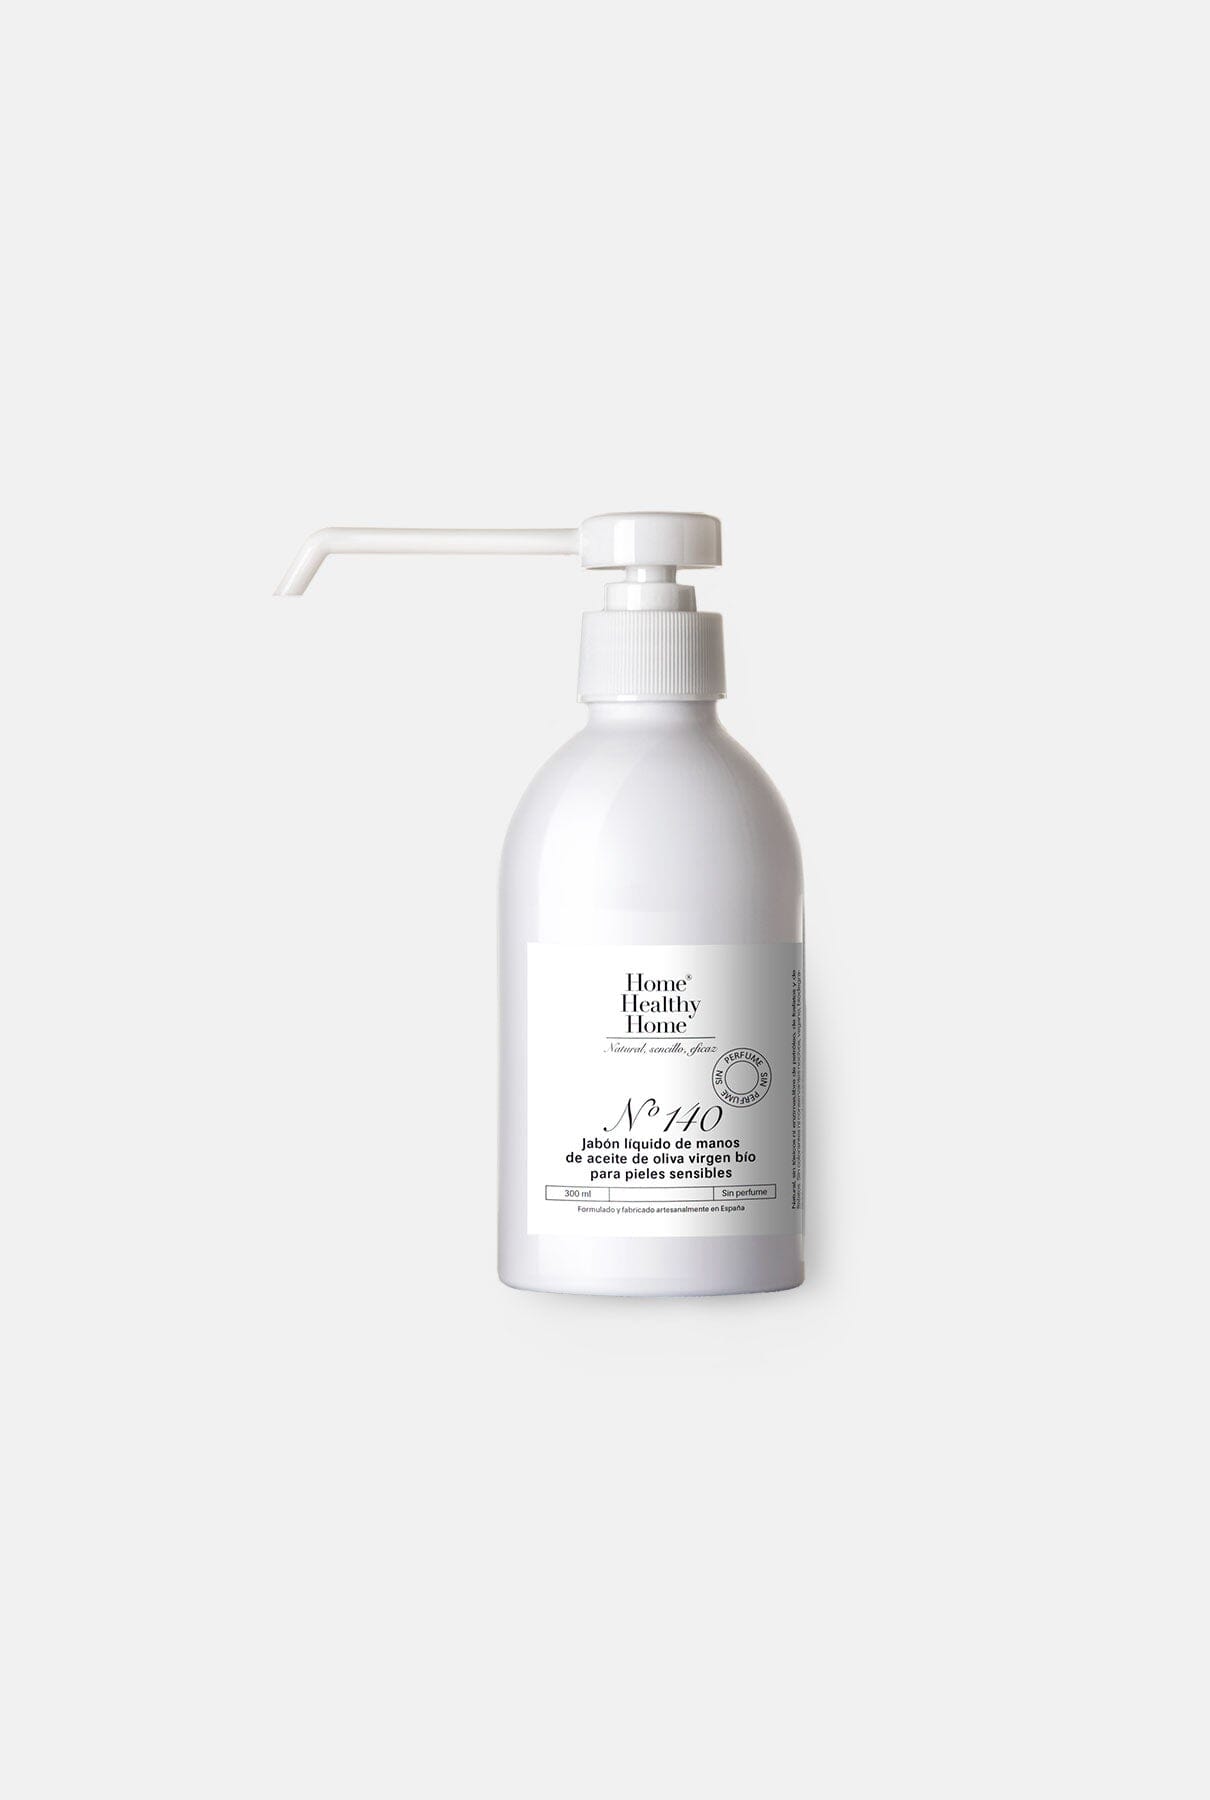 Unscented Natural Liquid Soap with Organic Olive Oil - No. 140 Laundry and Home Care HOME HEALTHY HOME 